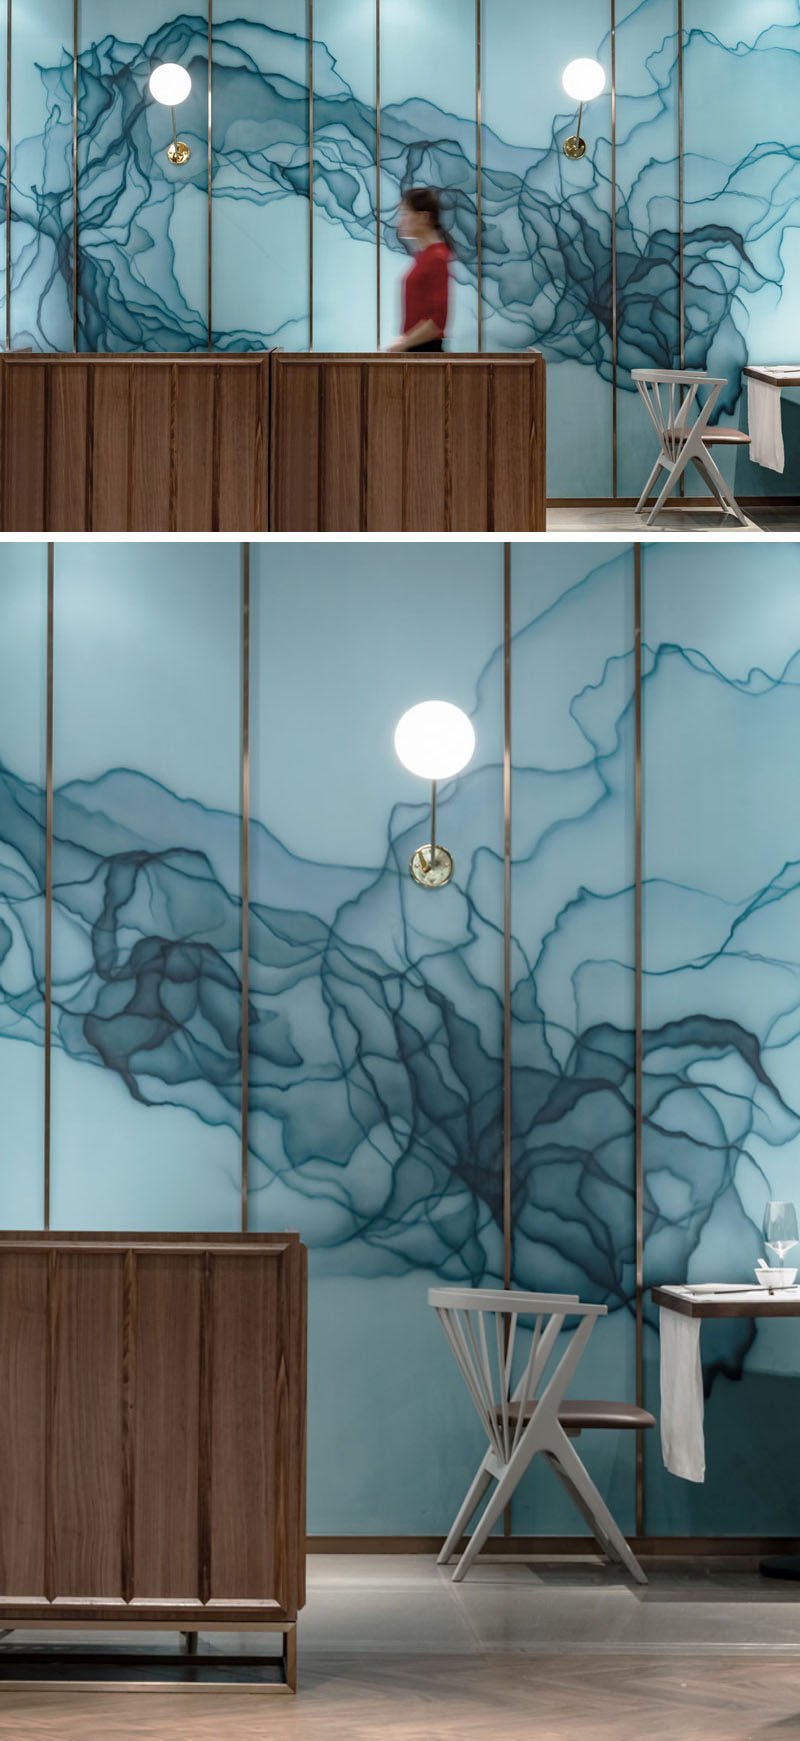 In this modern restaurant, there's an artistic wall that features an ink and dye pattern in shades of blue on embossed glass. #AccentWall #Blue #ModernRestaurant